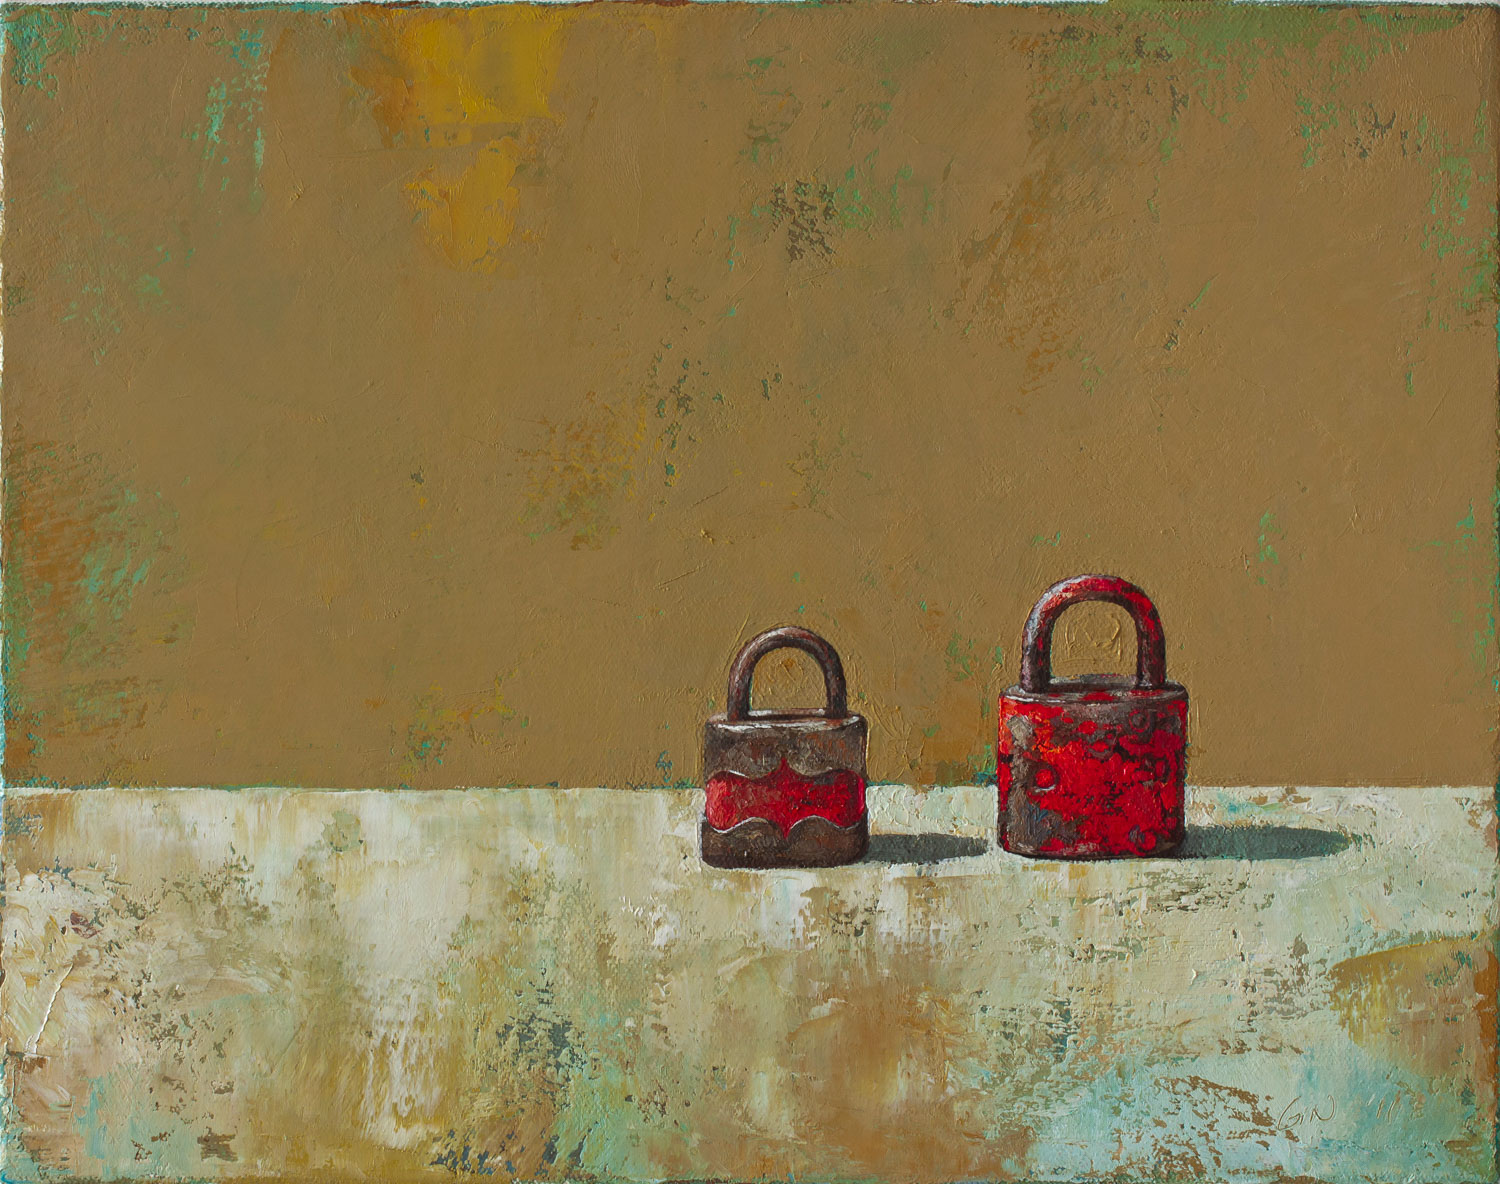   Two Red Locks  2011 oil on canvas 11 x 14 inches  Private collection 